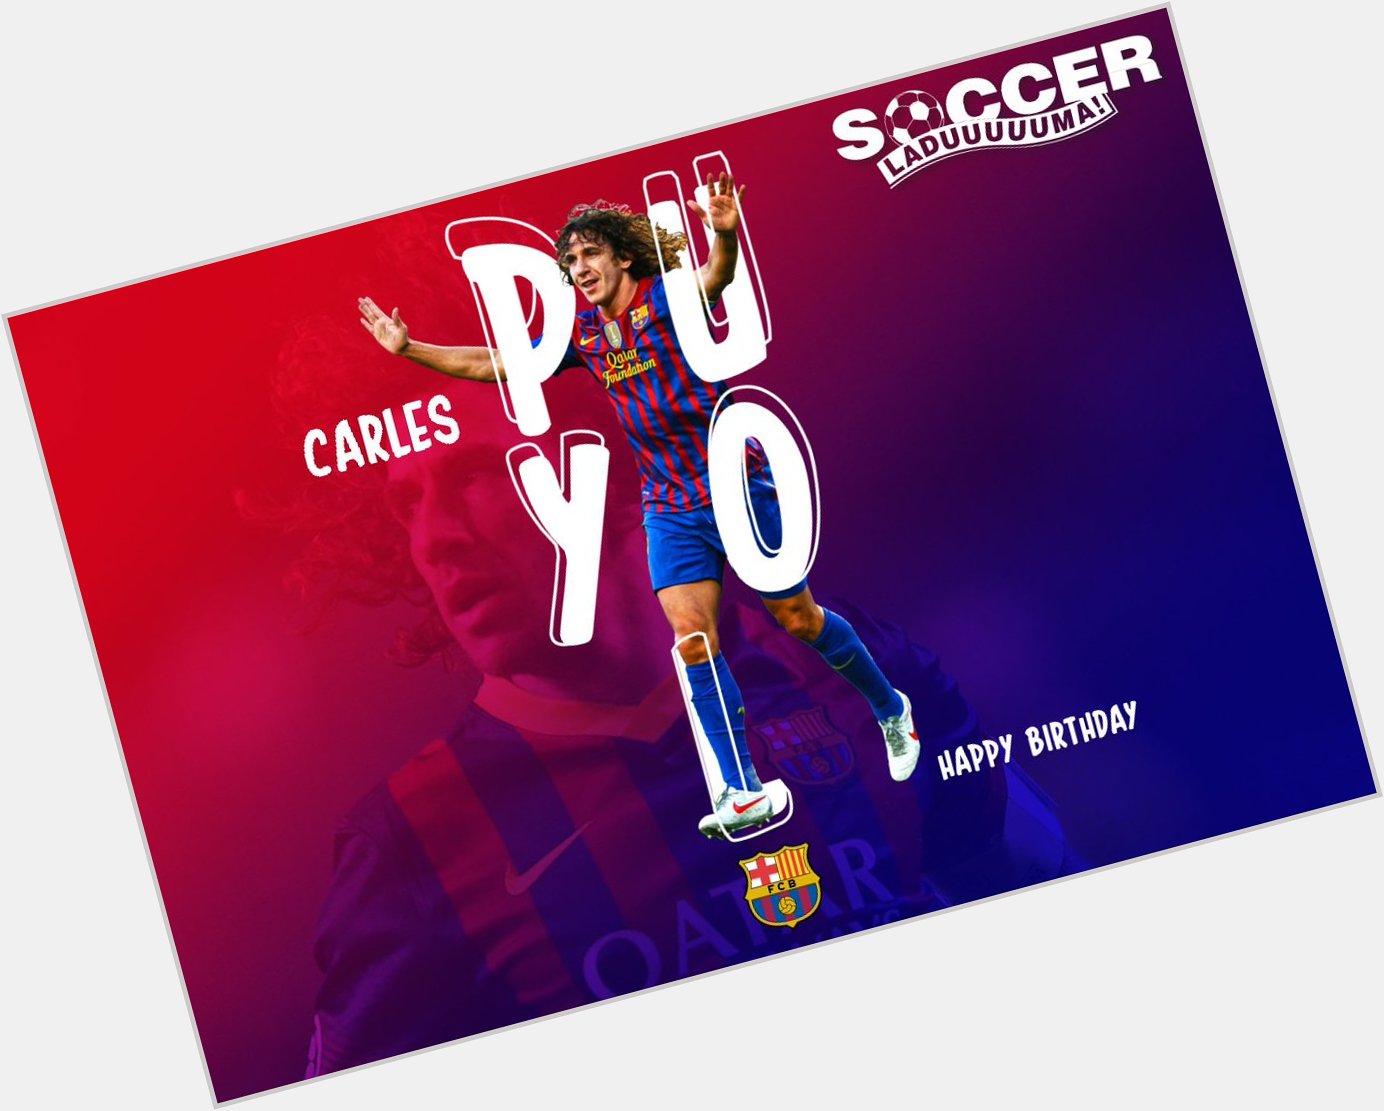 Barcelona\s historical captain, Carles Puyol turns the big 40 today! Join us in wishing him a Happy Birthday! 